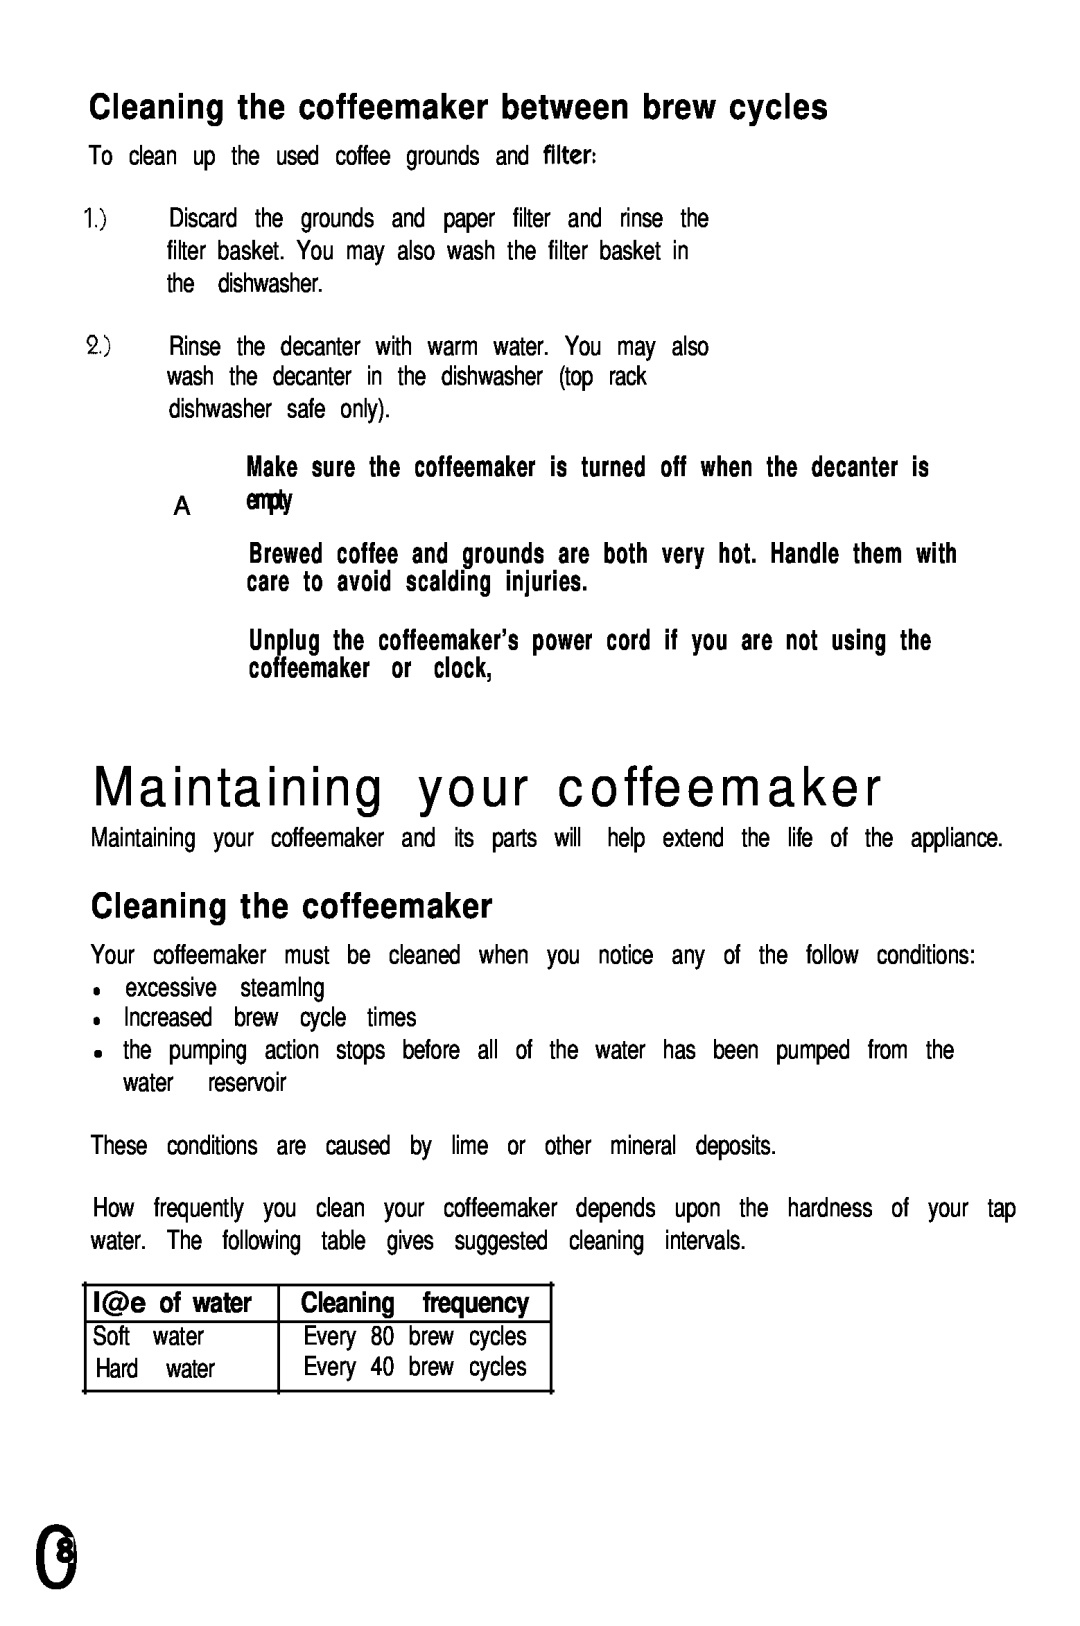 Mr. Coffee UN12 user manual Maintaining your coffeemaker, Cleaning the coffeemaker between brew cycles 